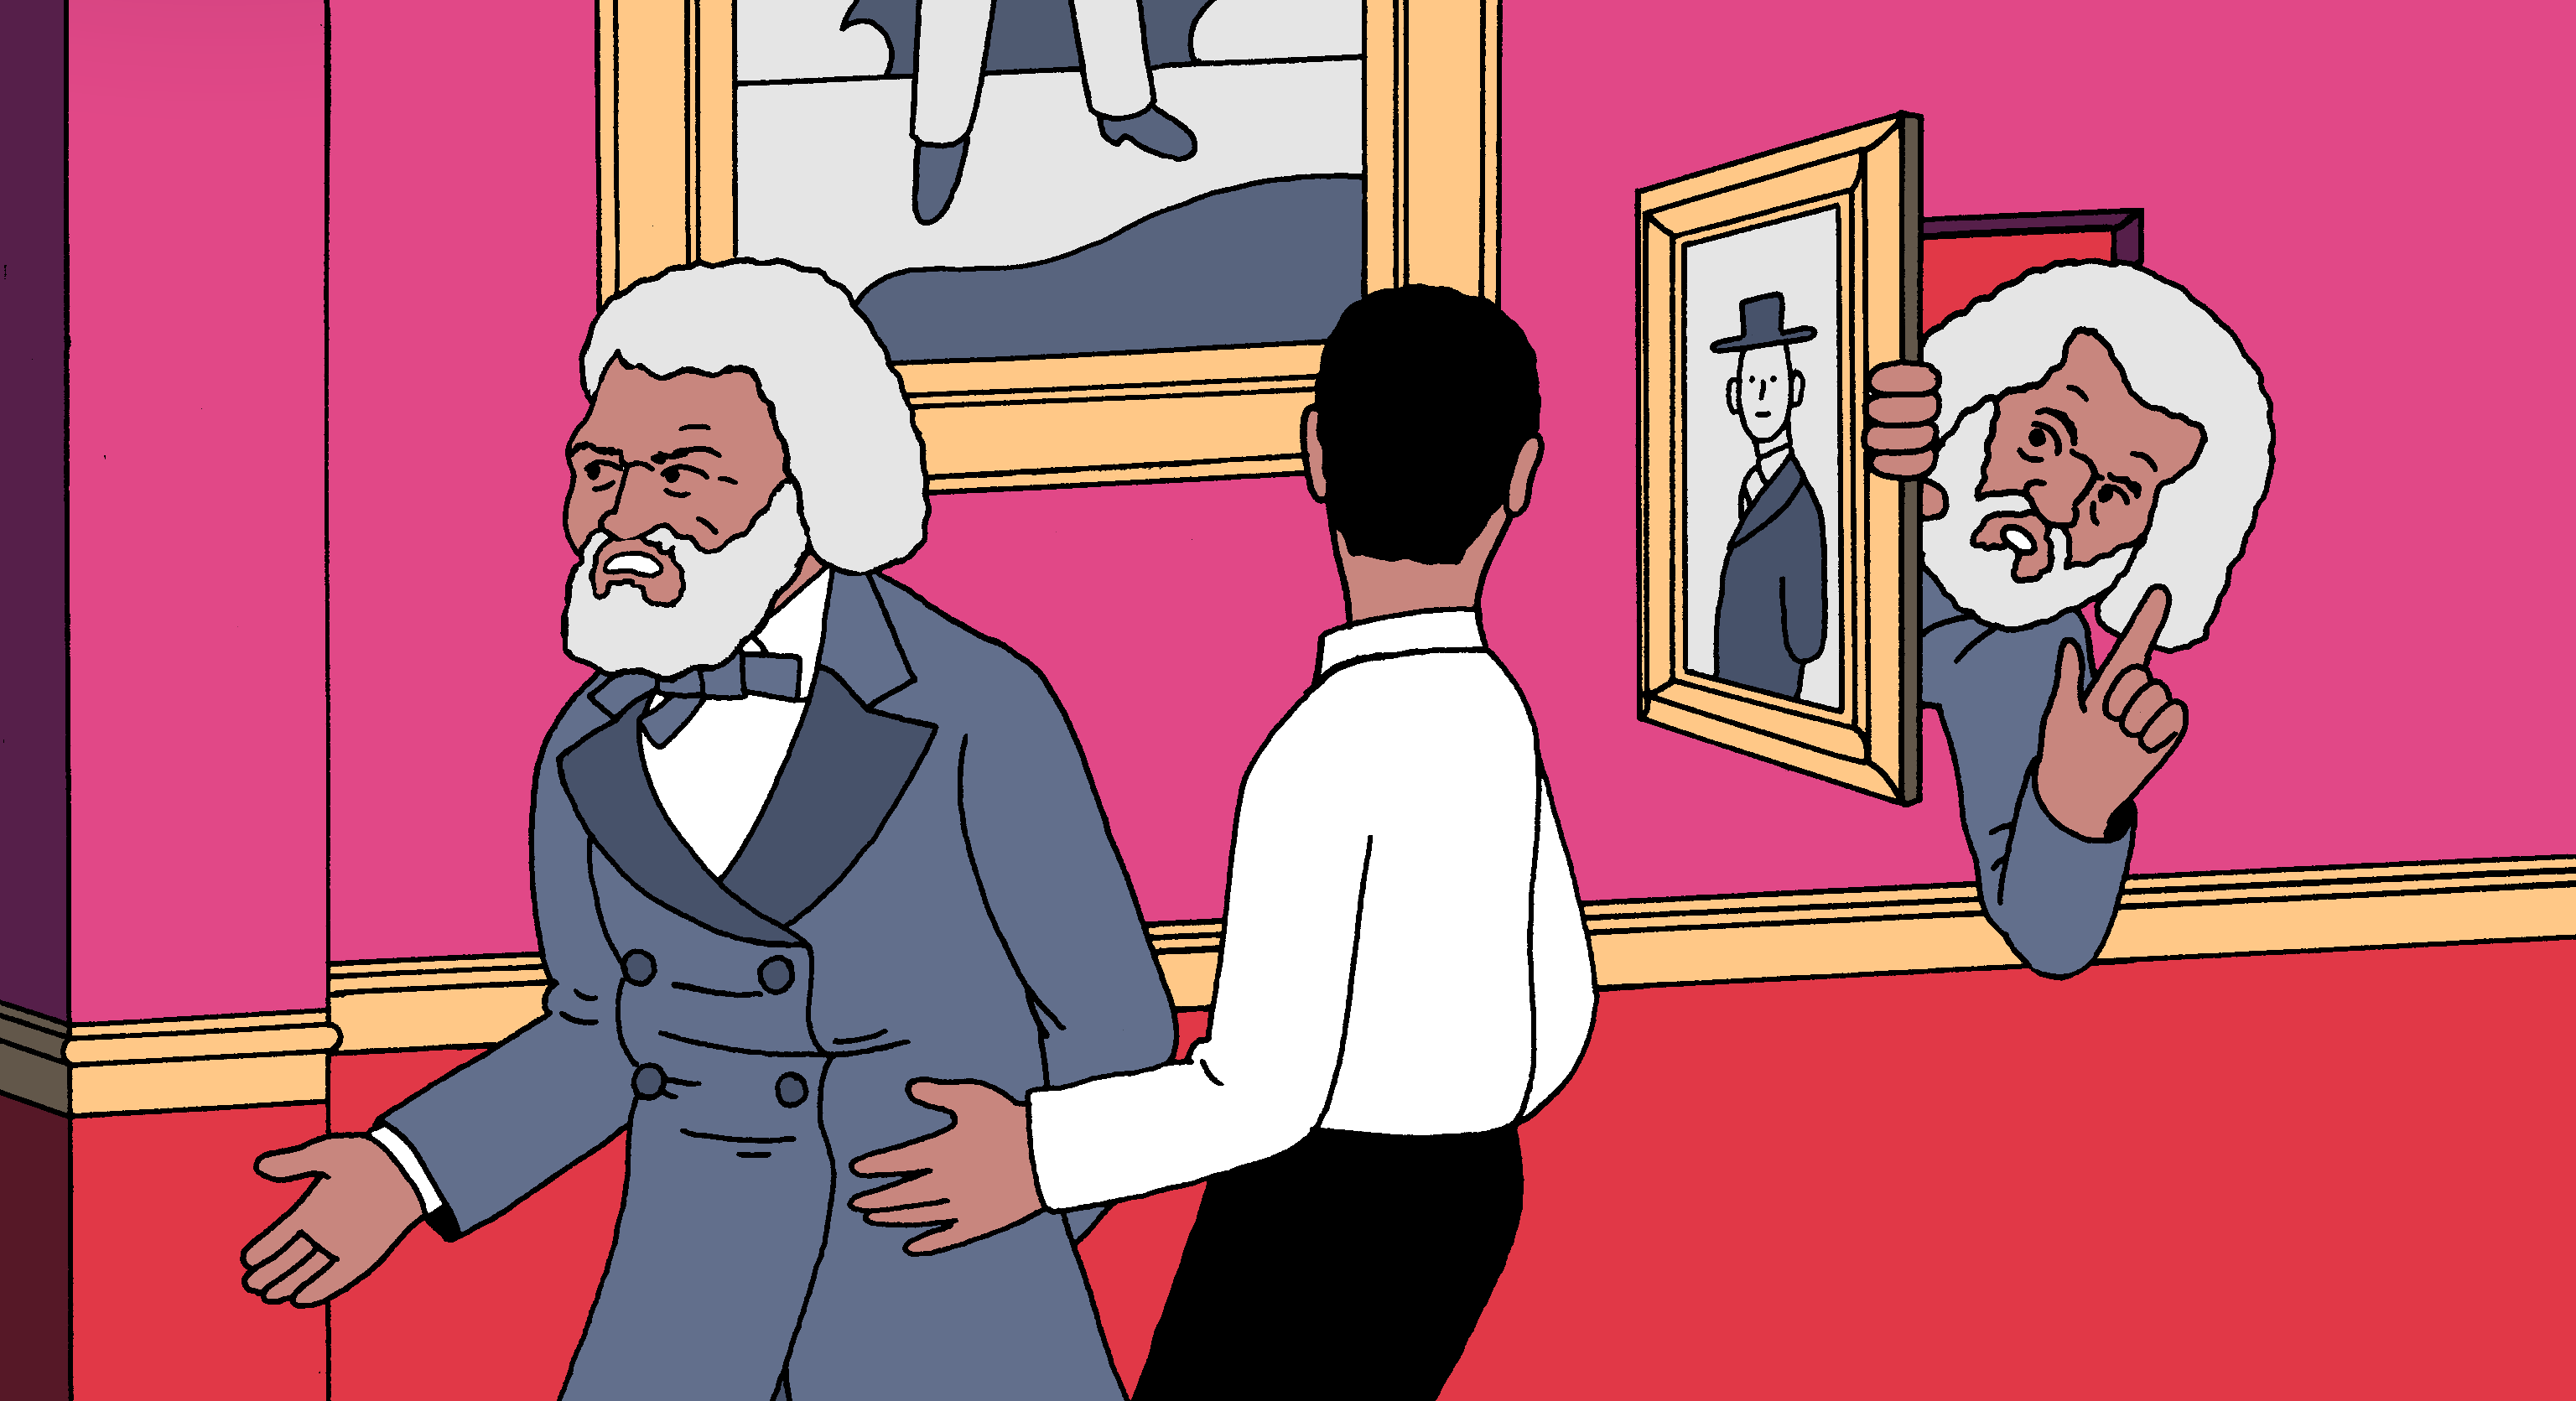 Fredrick Douglass walks through a hallway with a confidant by his side, a look of defiance on his face. The confidant looks back at another version of Douglass, who is peering out of a painting and giving him a warning look.